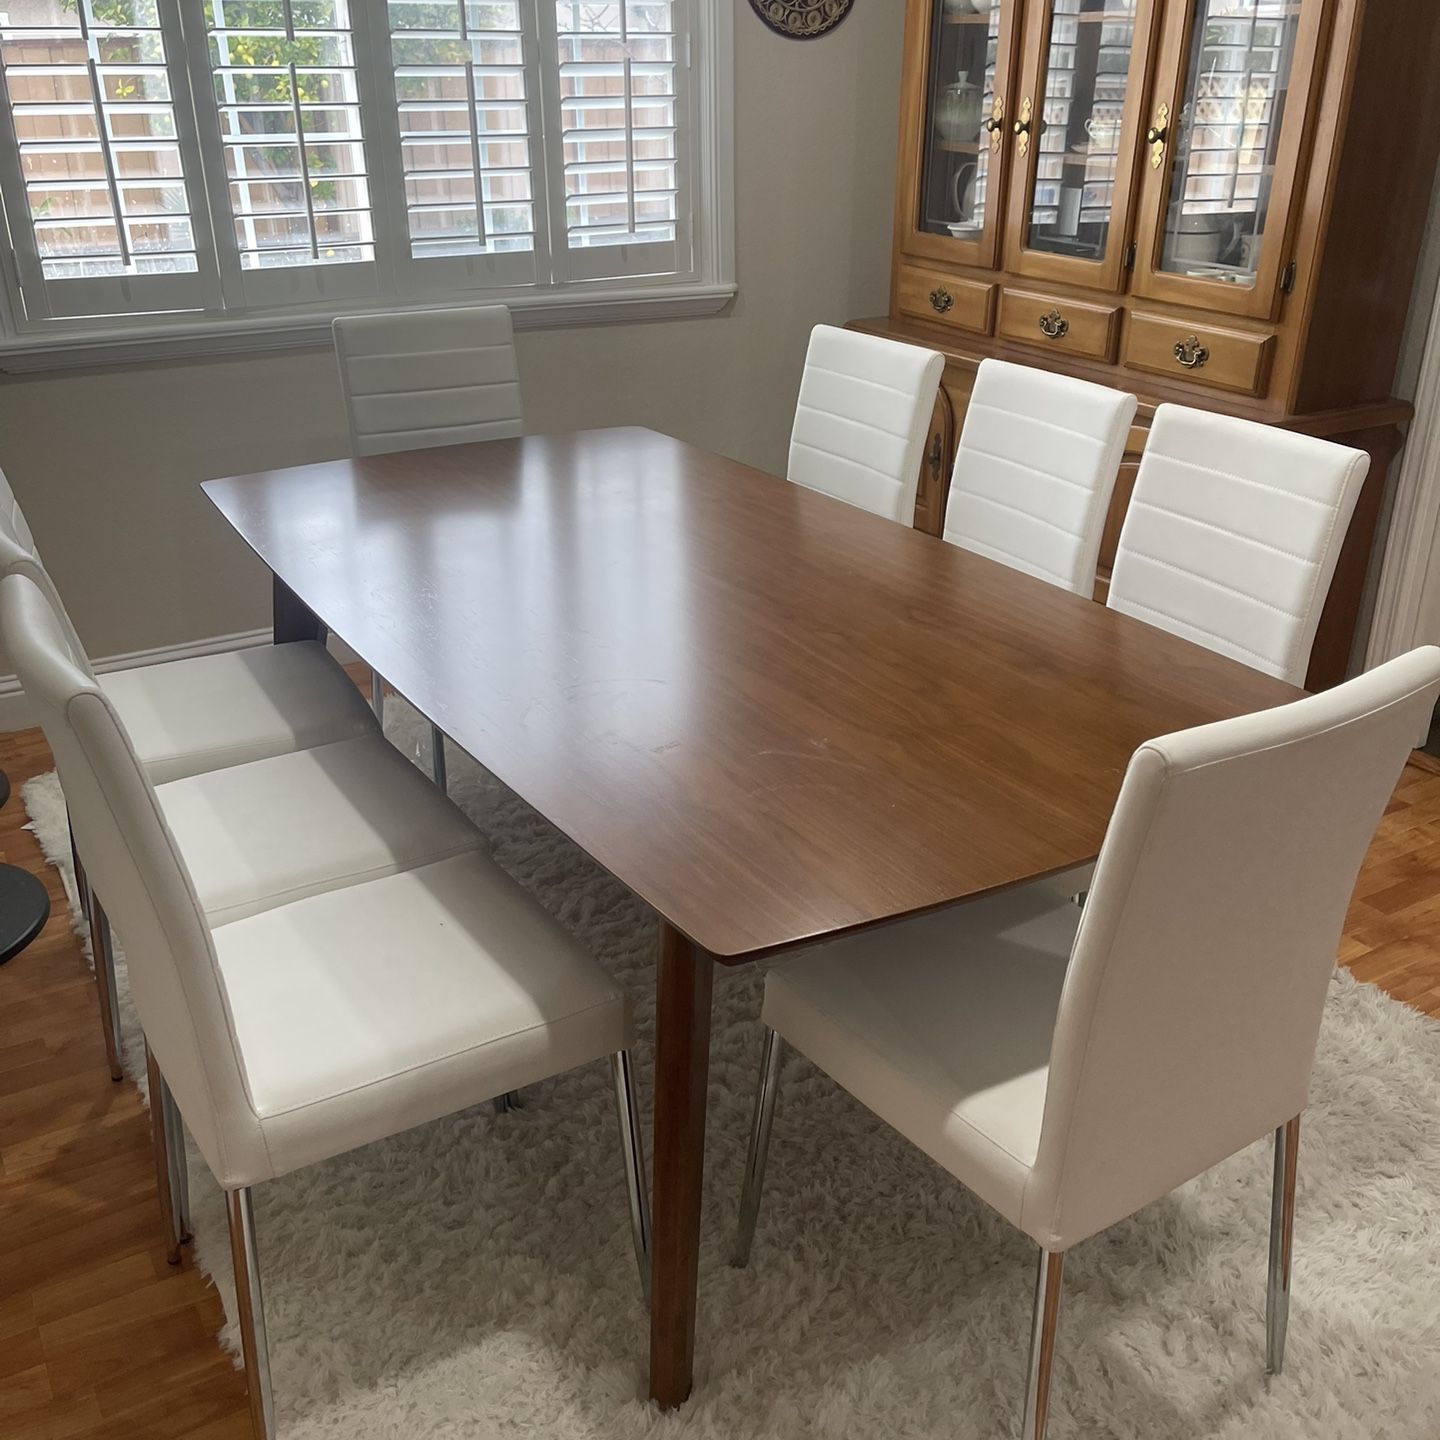 Move Out Sale- Living Space - Rectangular Dining Table Sets With 6 Chair